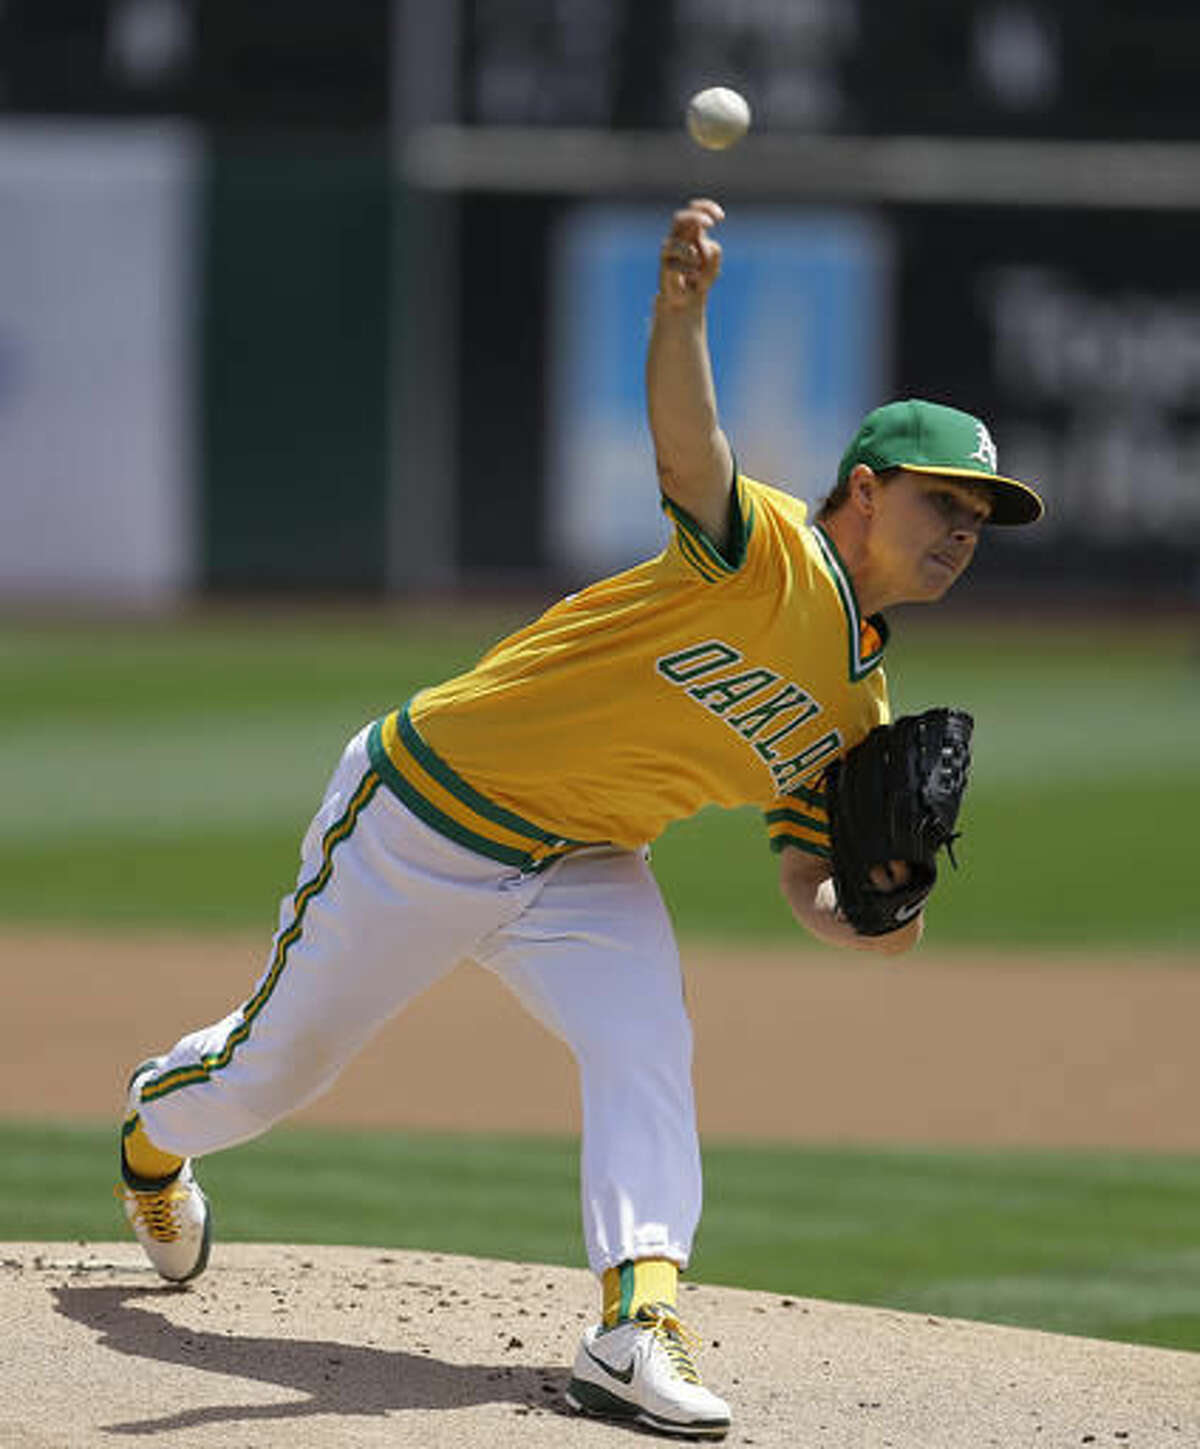 Oakland Athletics pitcher Sonny Gray works against the Chicago Cubs in the first inning of a baseball game Saturday, Aug. 6, 2016, in Oakland, Calif. (AP Photo/Ben Margot)